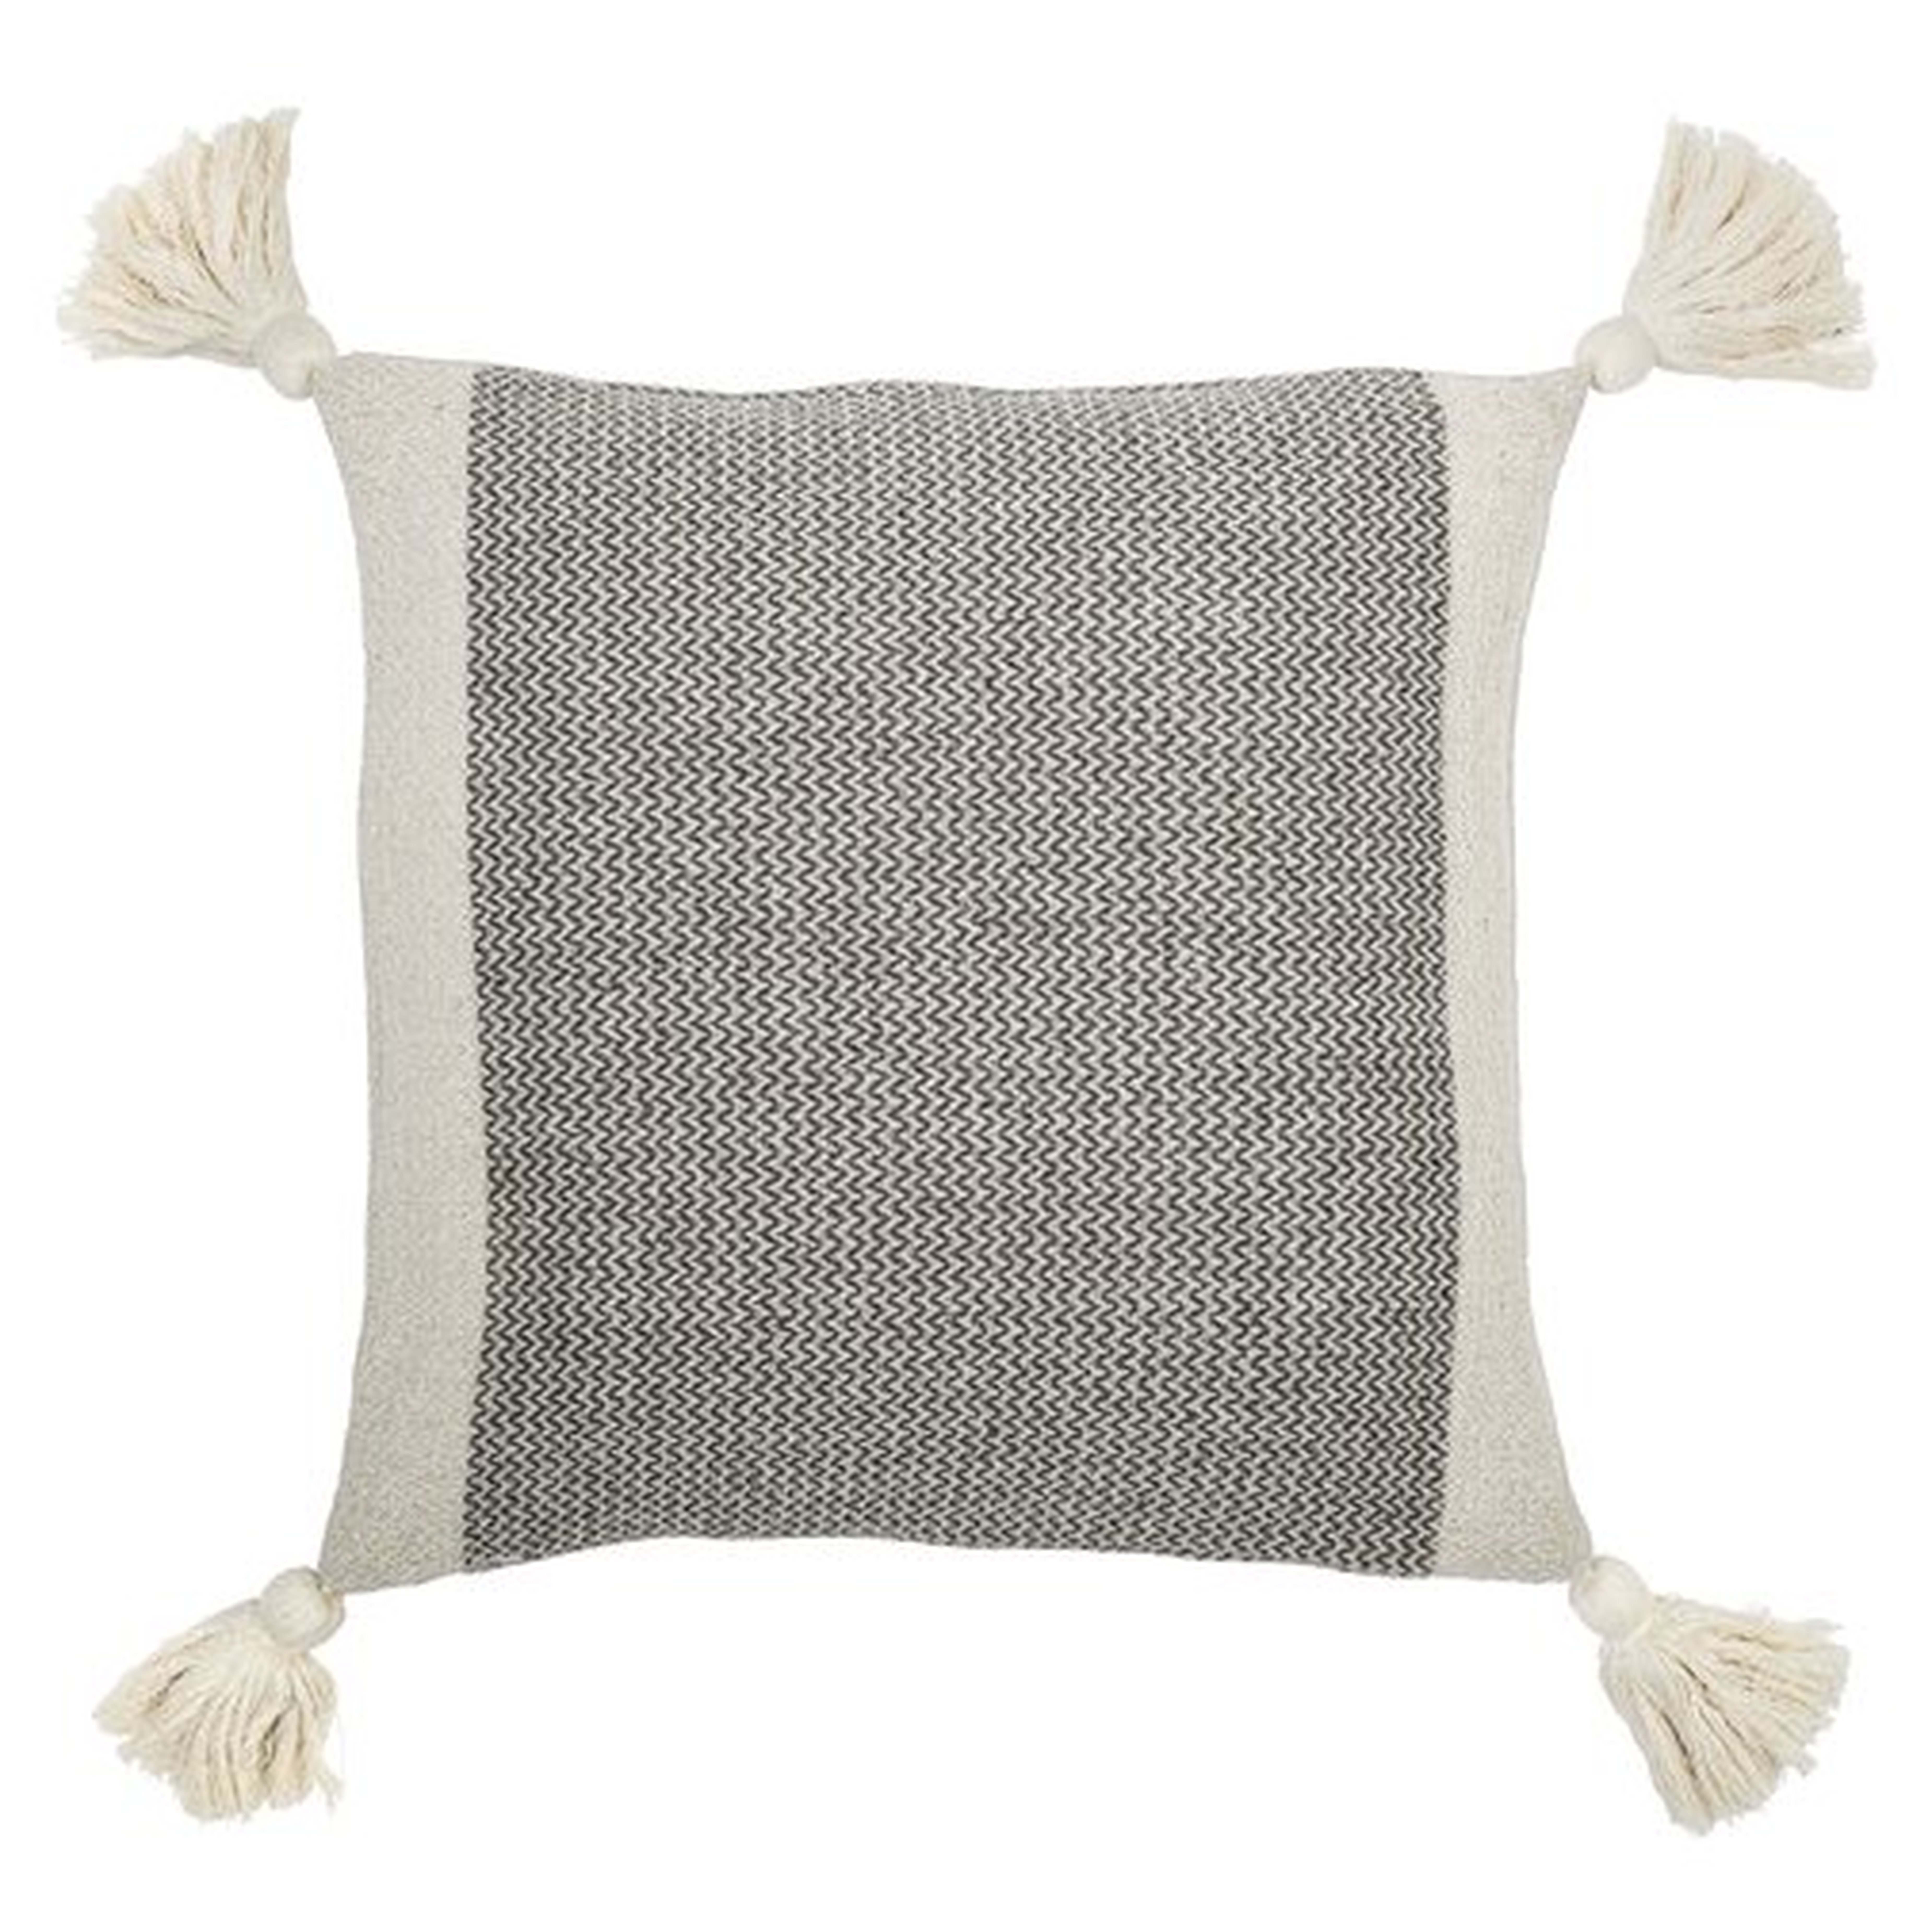 Said Square Pillow - insert included - Wayfair